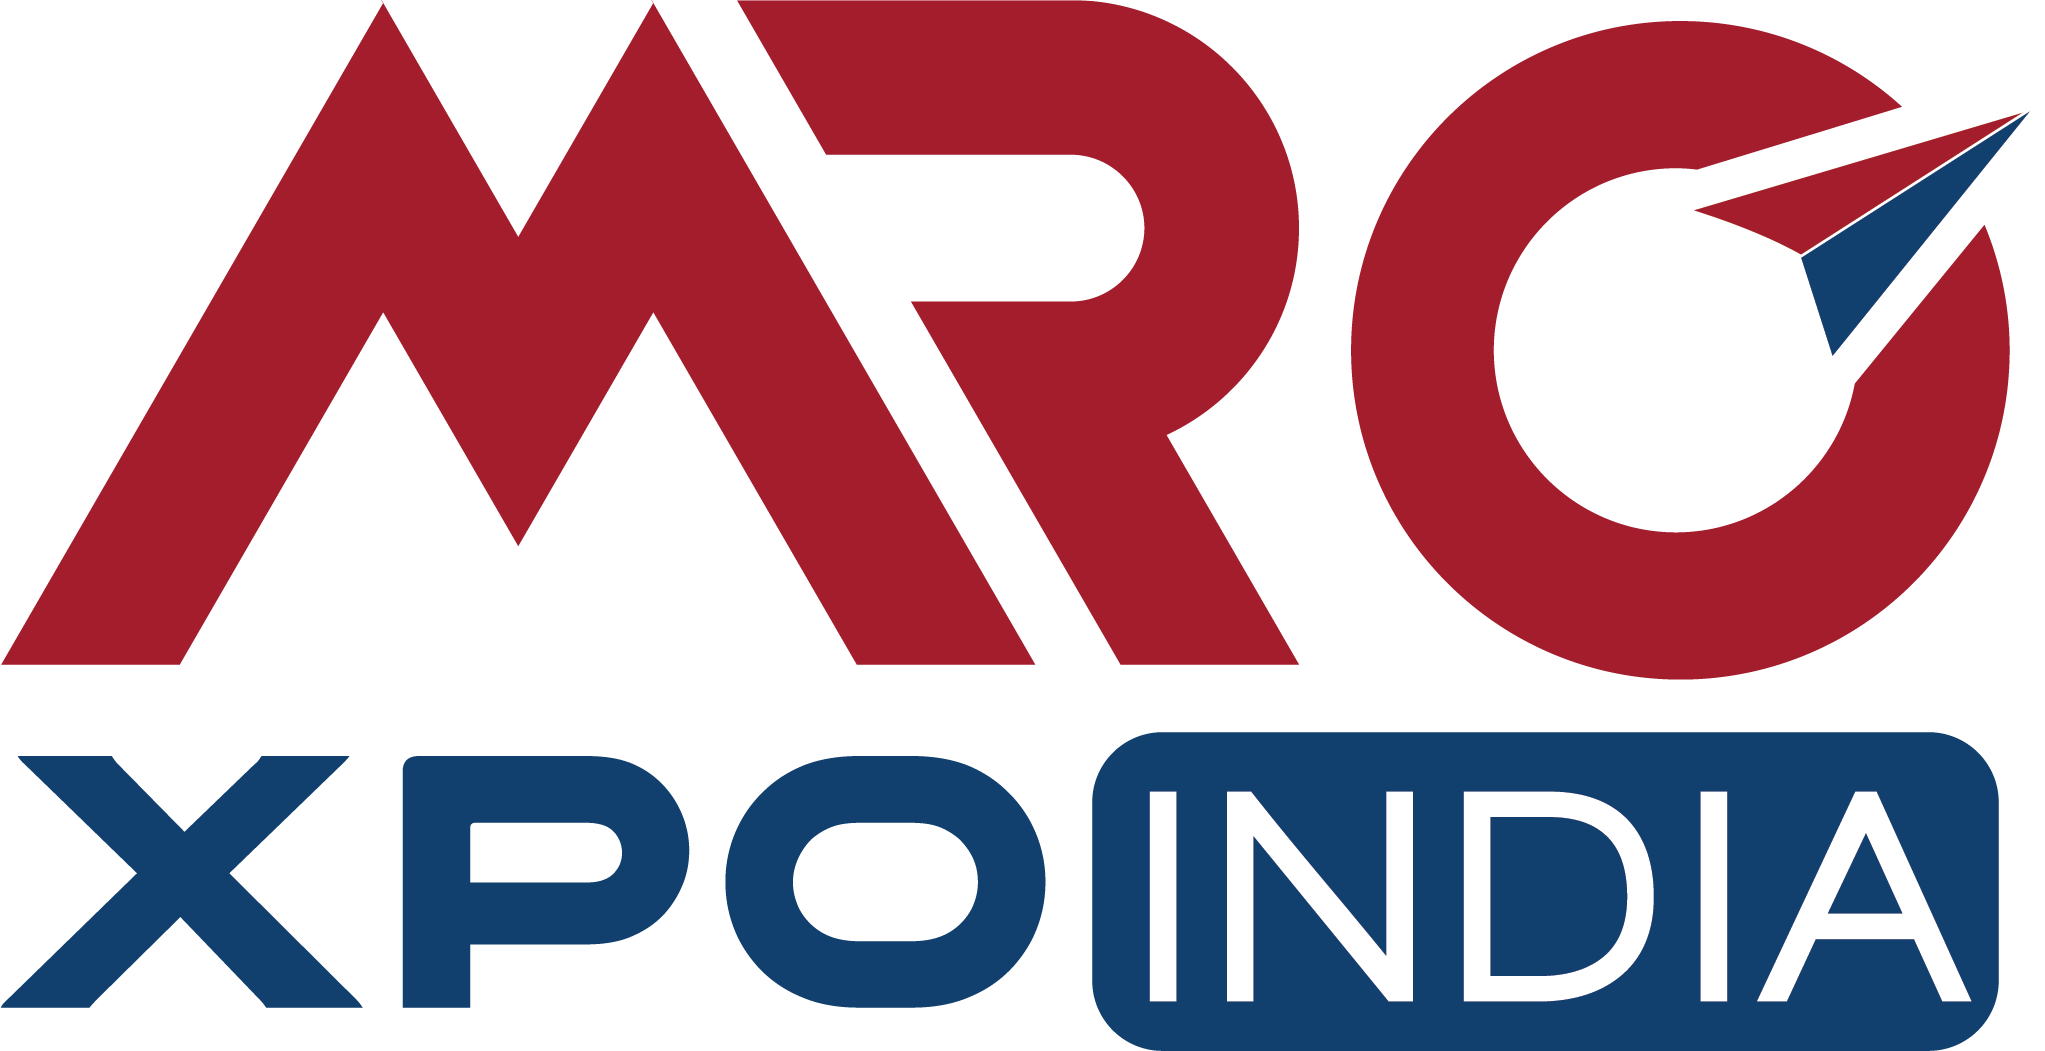 AMG ANNOUNCES ITS MEGA EDITION – MRO XPO INDIA & AIRCRAFT INTERIORS INDIA 2025 co-located with the 6th A & D MRO South Asia Summit 2025